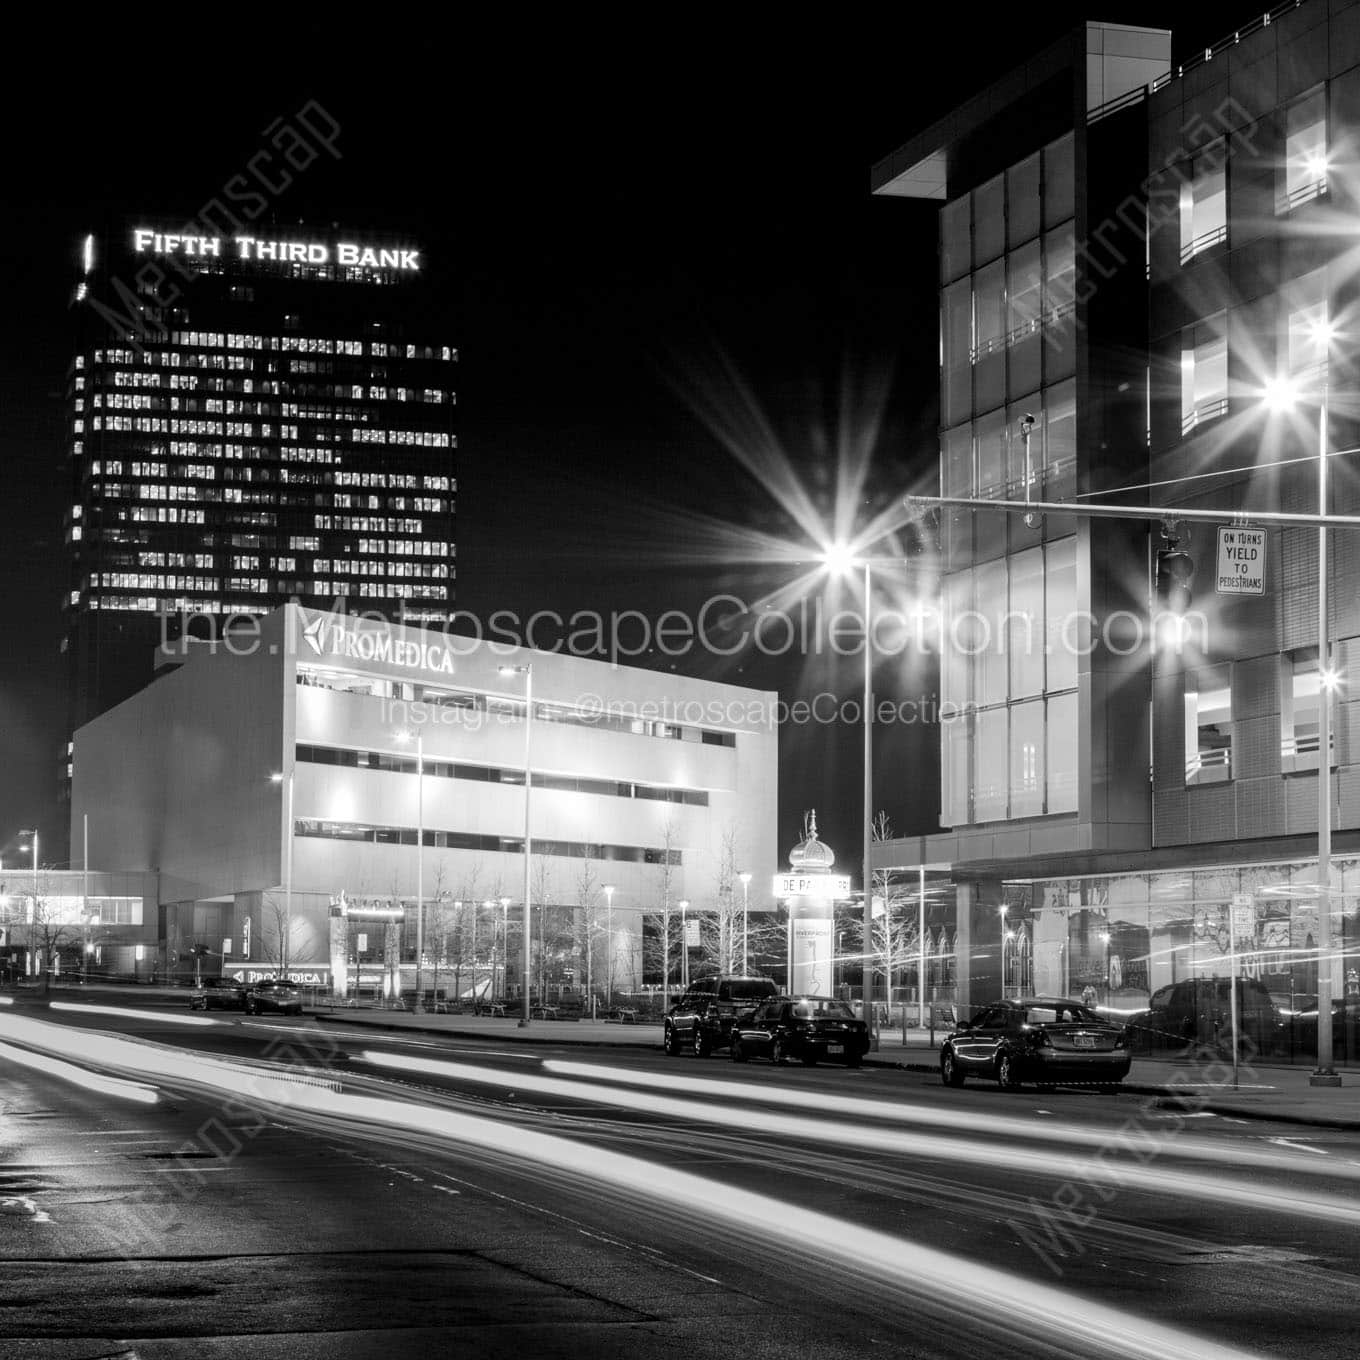 downtown toledo levis square at night Black & White Office Art